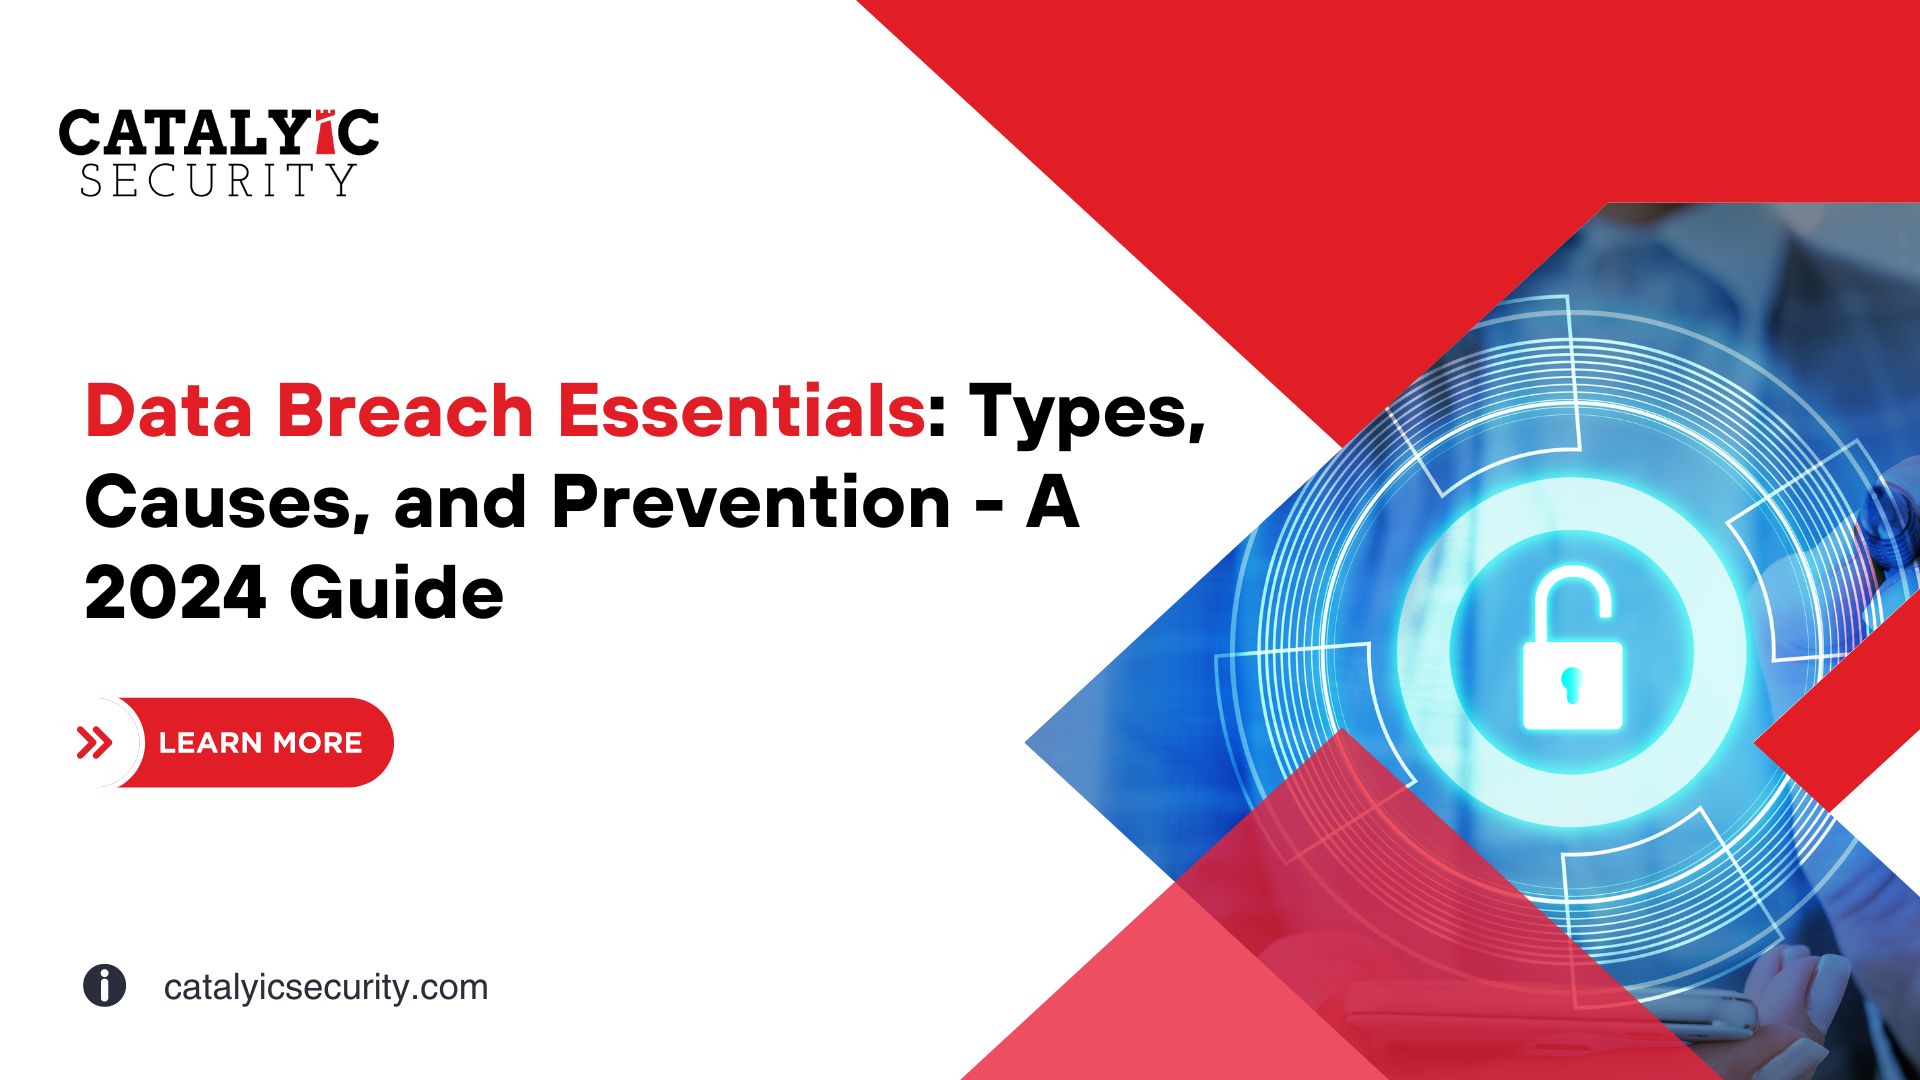 Data Breaches Types, Causes, and Impacts A 2024 Guide